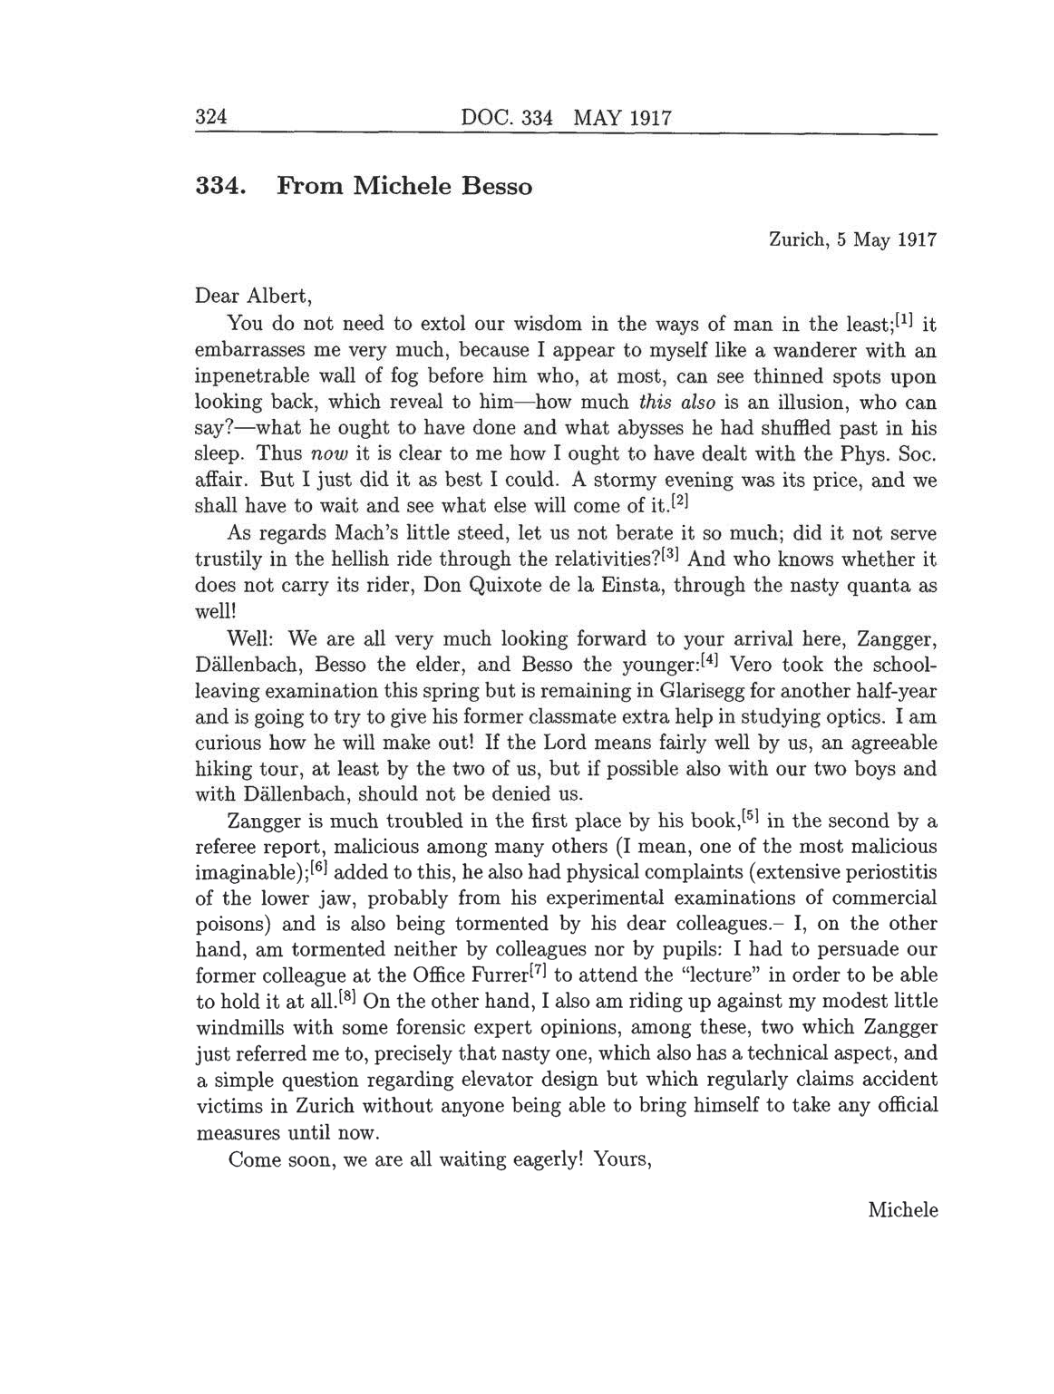 Volume 8: The Berlin Years: Correspondence, 1914-1918 (English translation supplement) page 324